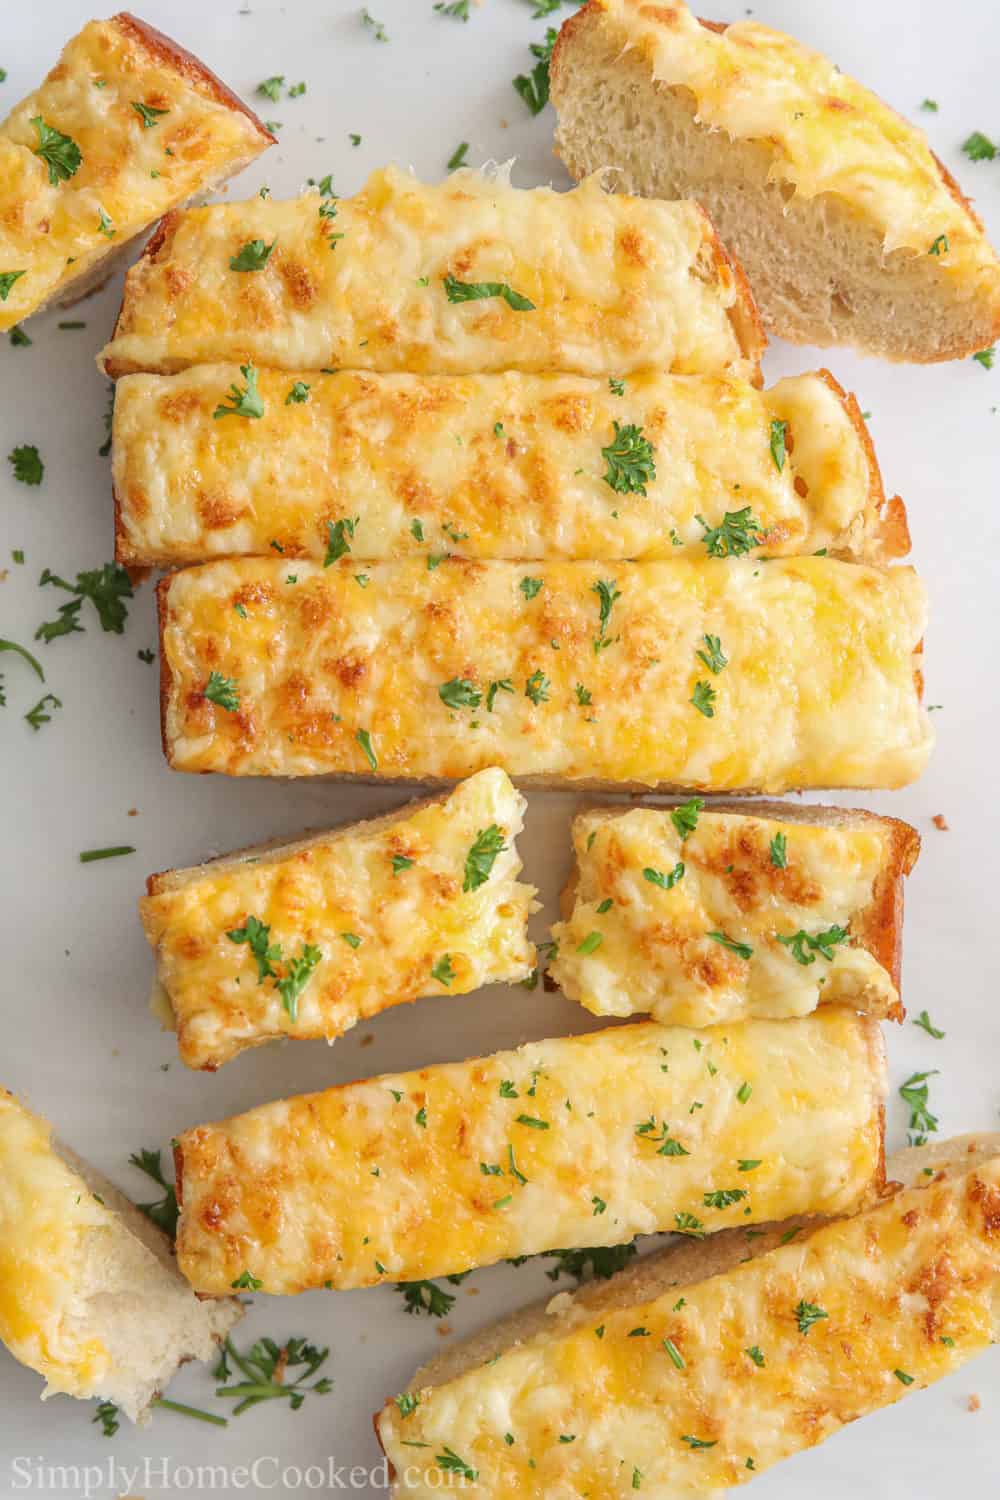 Slices of Garlic Cheese Bread garnished with parsley.